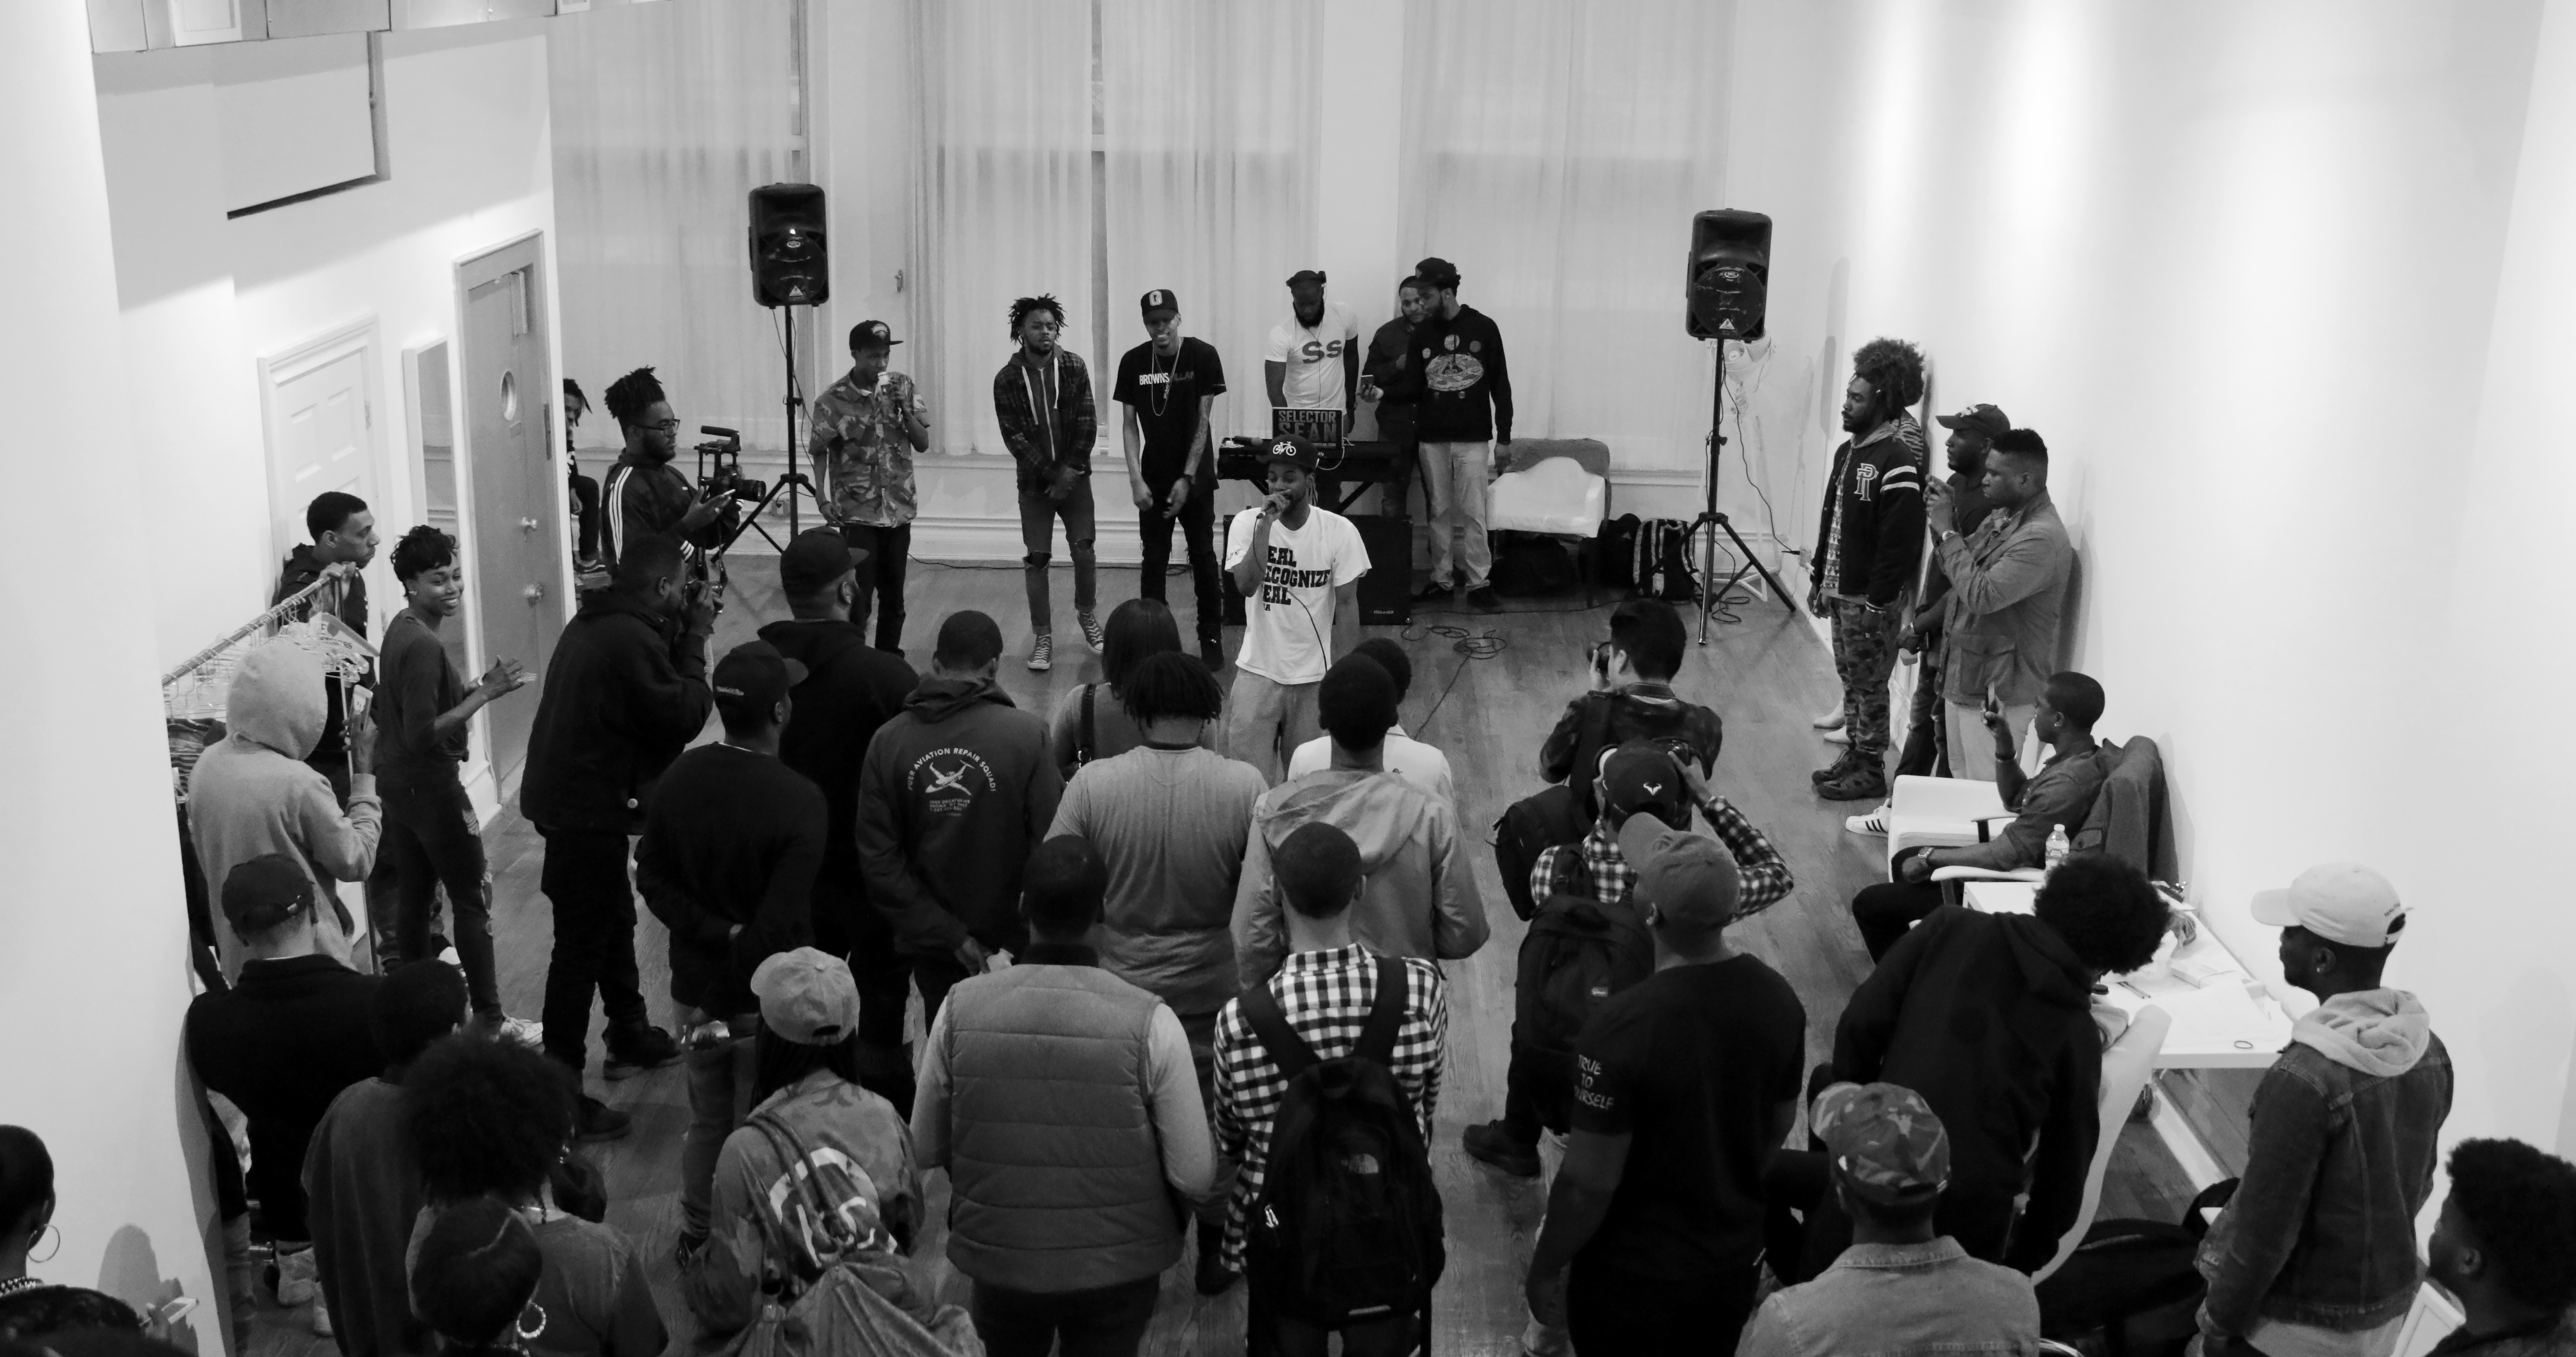 [Photos From Last Night] Art Genesis 2 presented by the Indie Creative Network